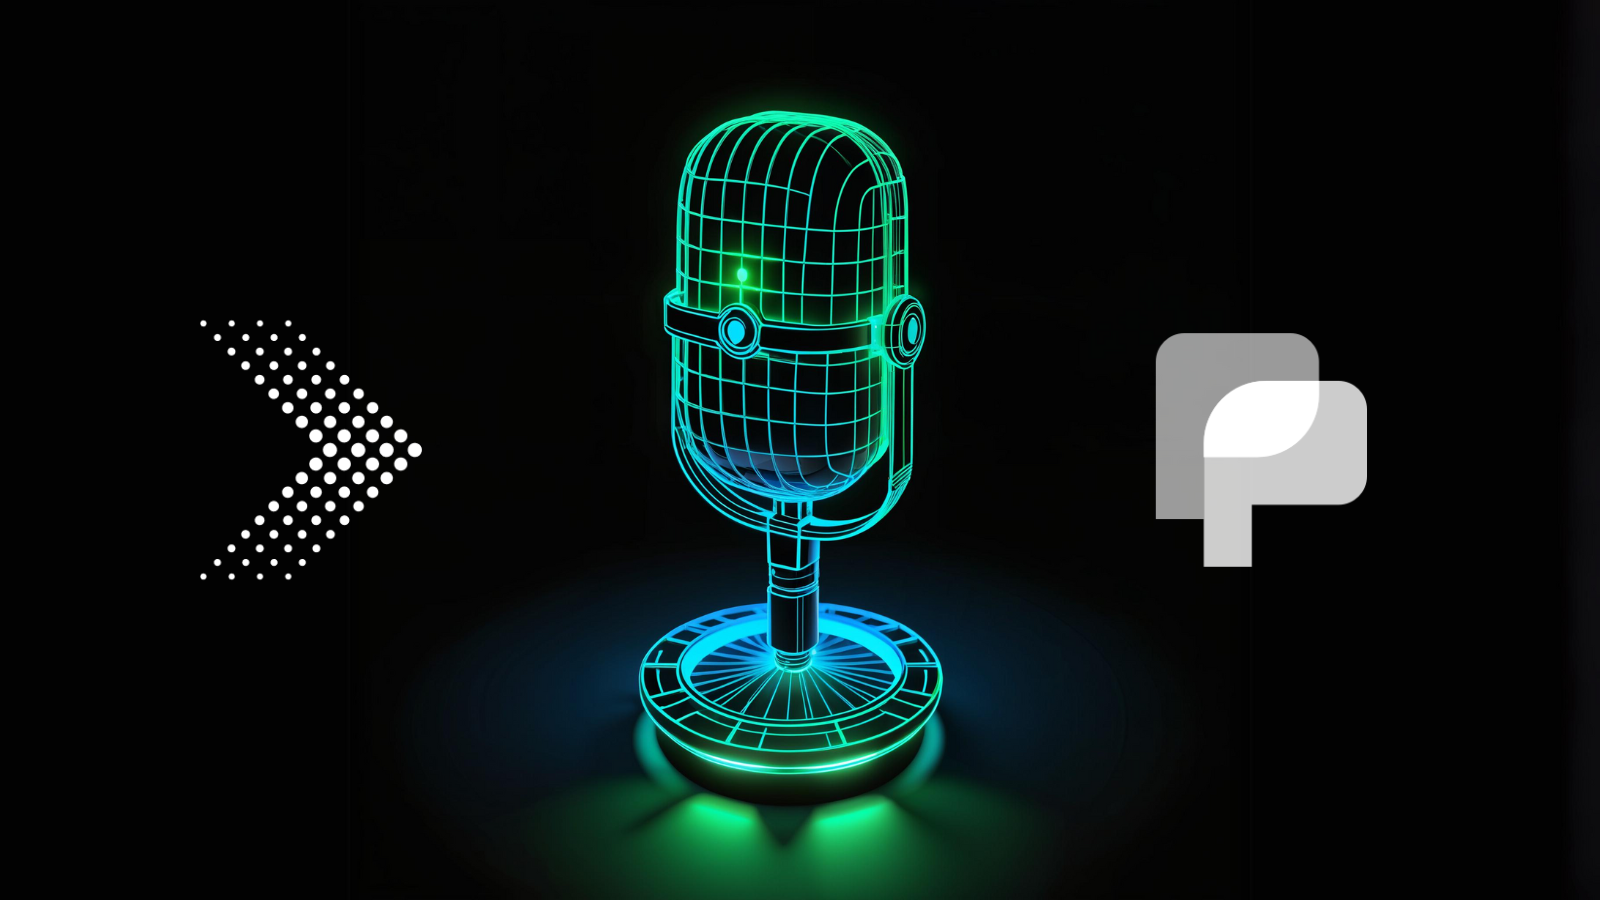 Neon-lit 3D microphone on black background with a white 'P' and arrow pointing right, amidst a green and blue glow.